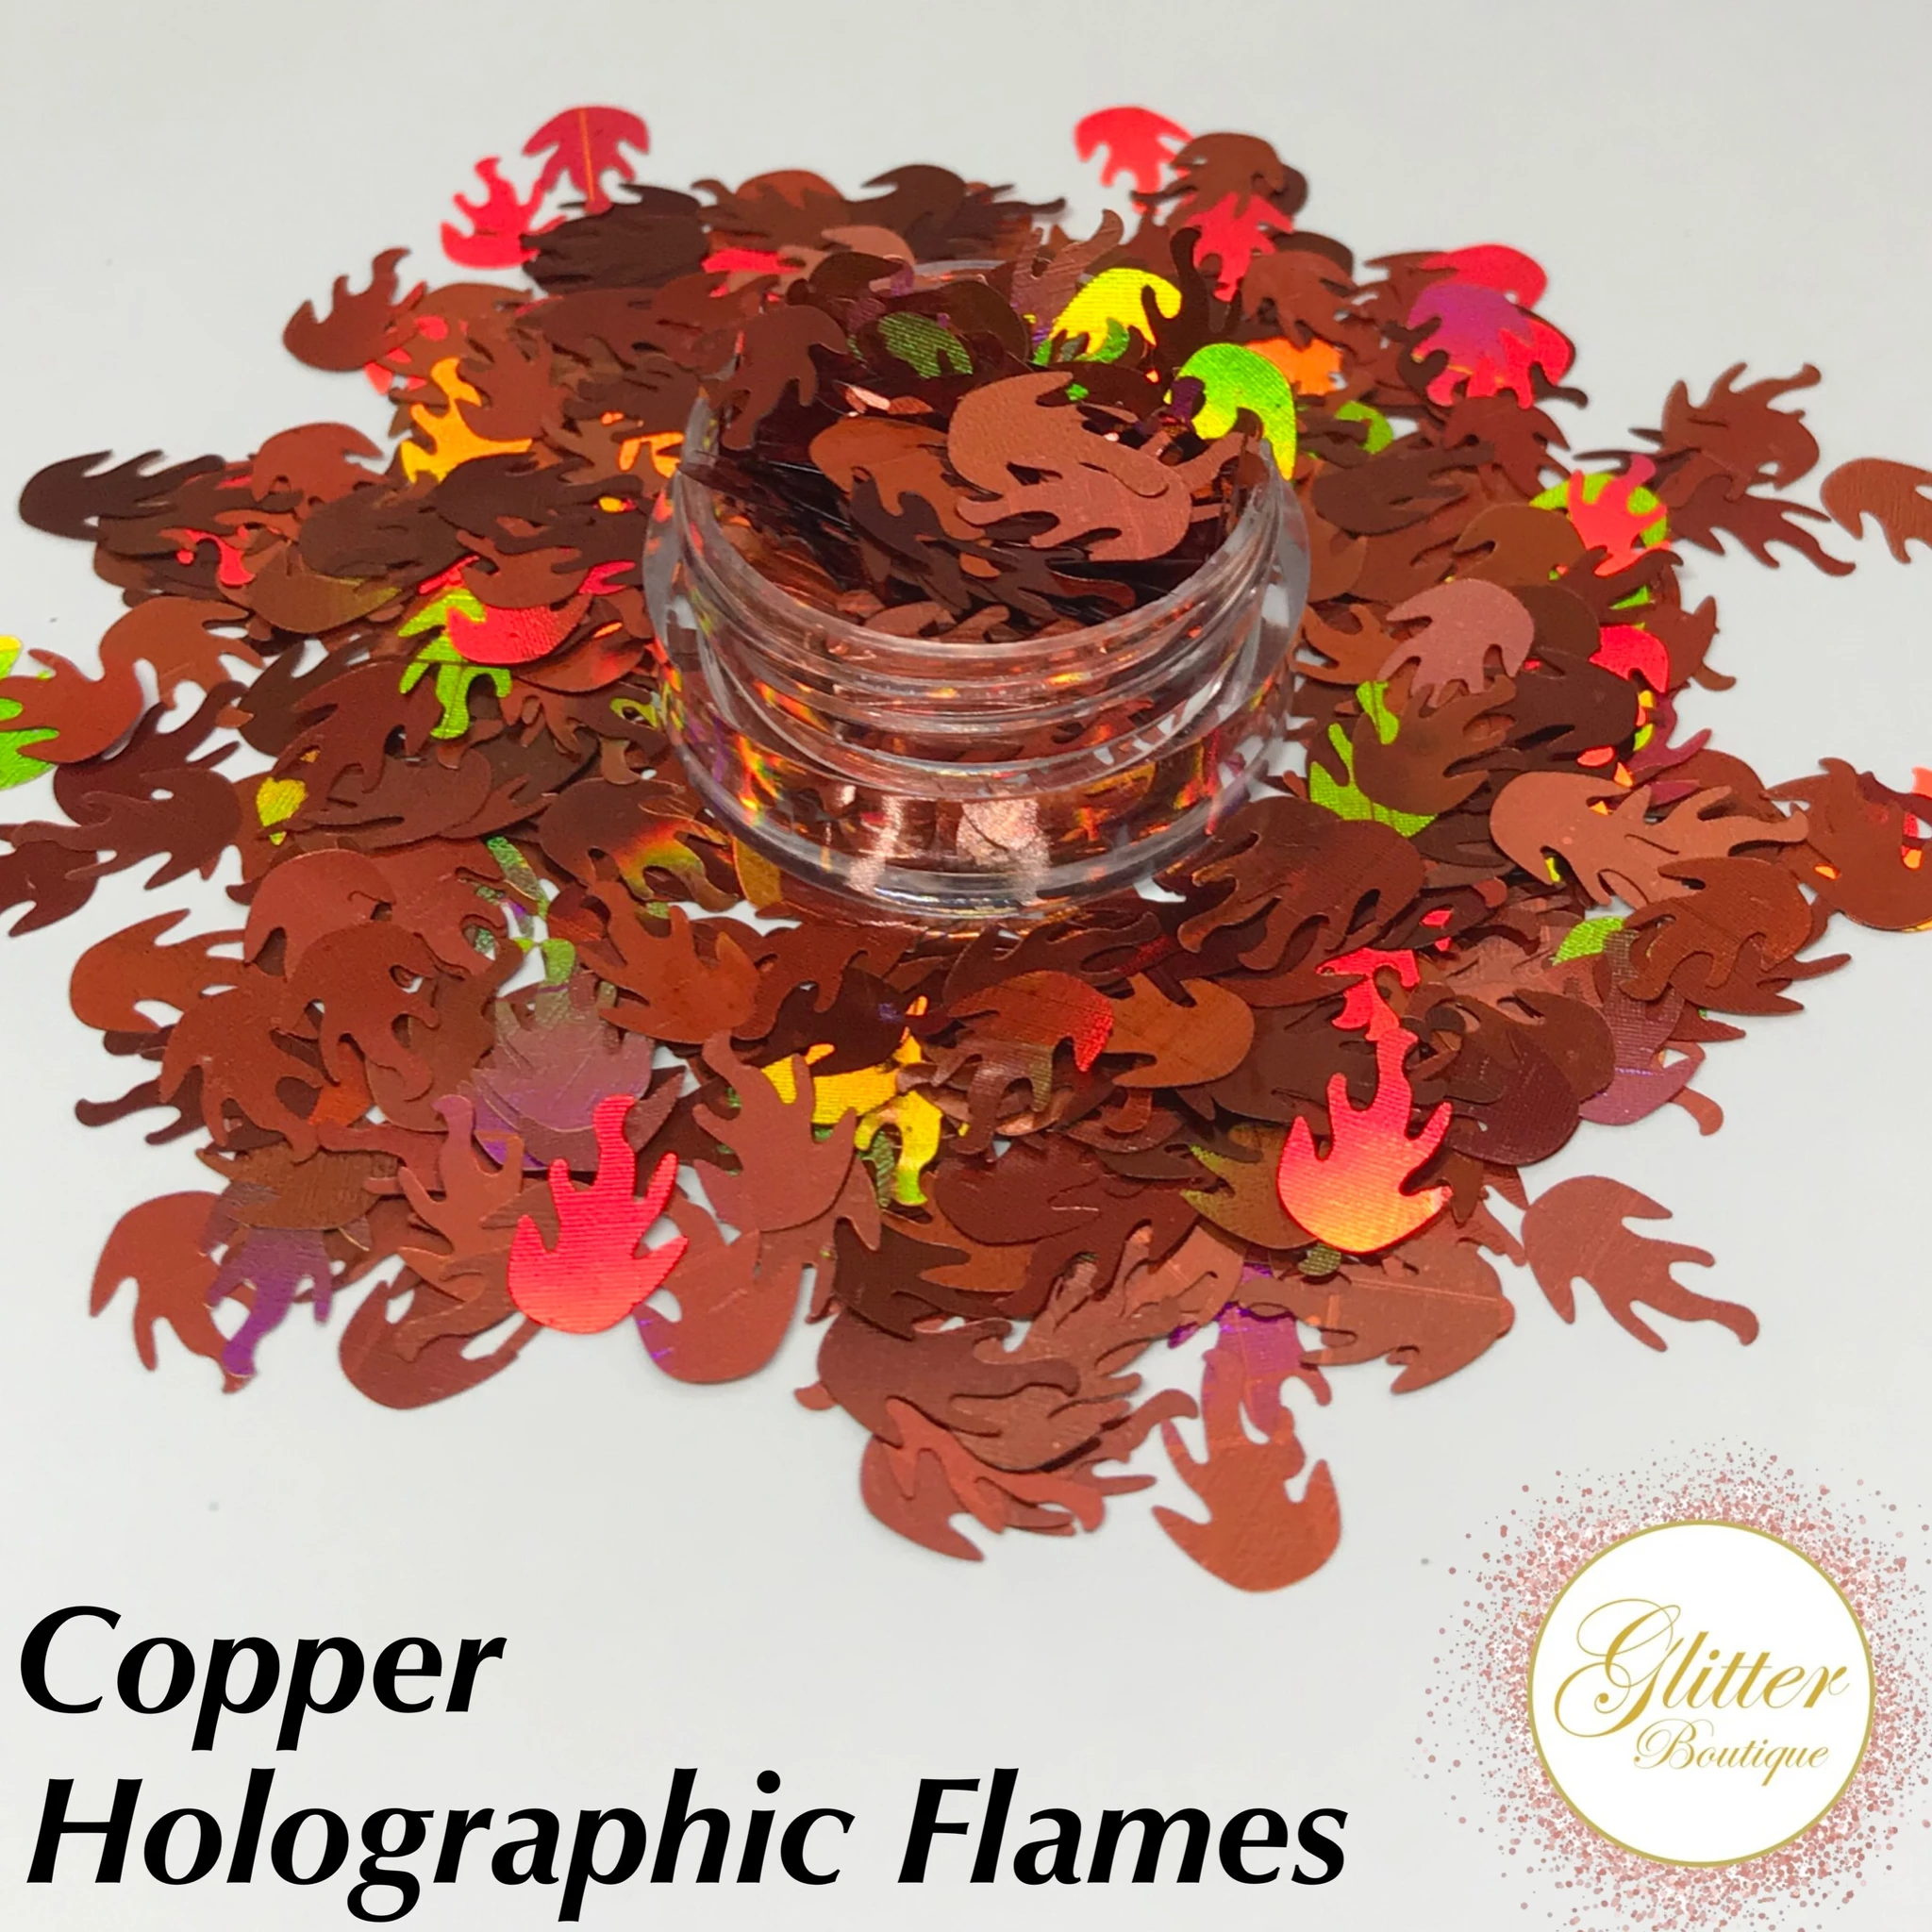 Glitter Boutique - Copper Holographic Flames - Creata Beauty - Professional Beauty Products